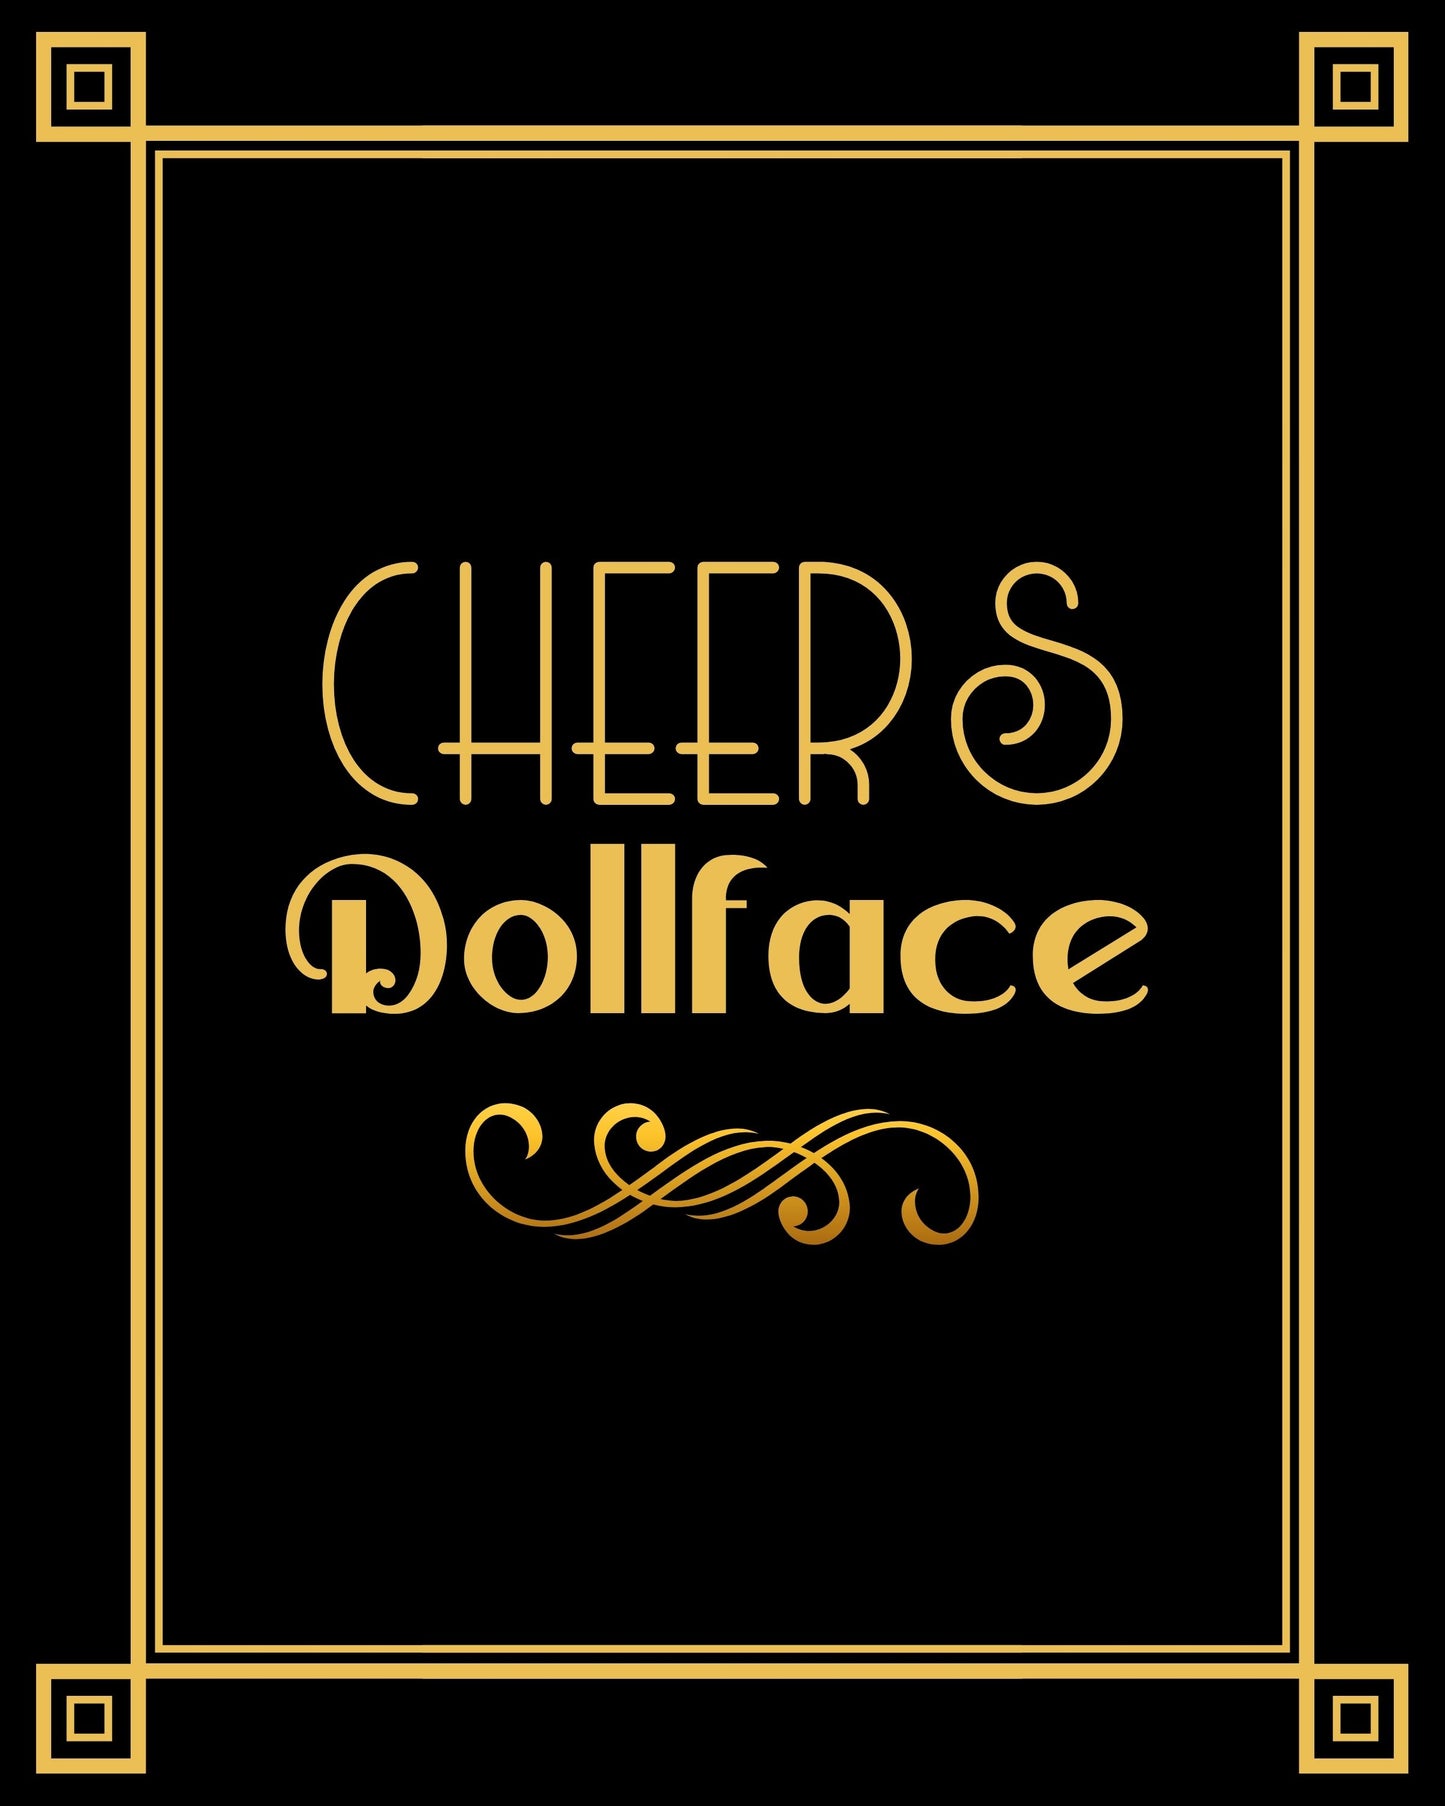 "Cheers Dollface" Printable Party Sign For Great Gatsby or Roaring 20's Party Or Wedding, Black & Gold, Printable Party Decor